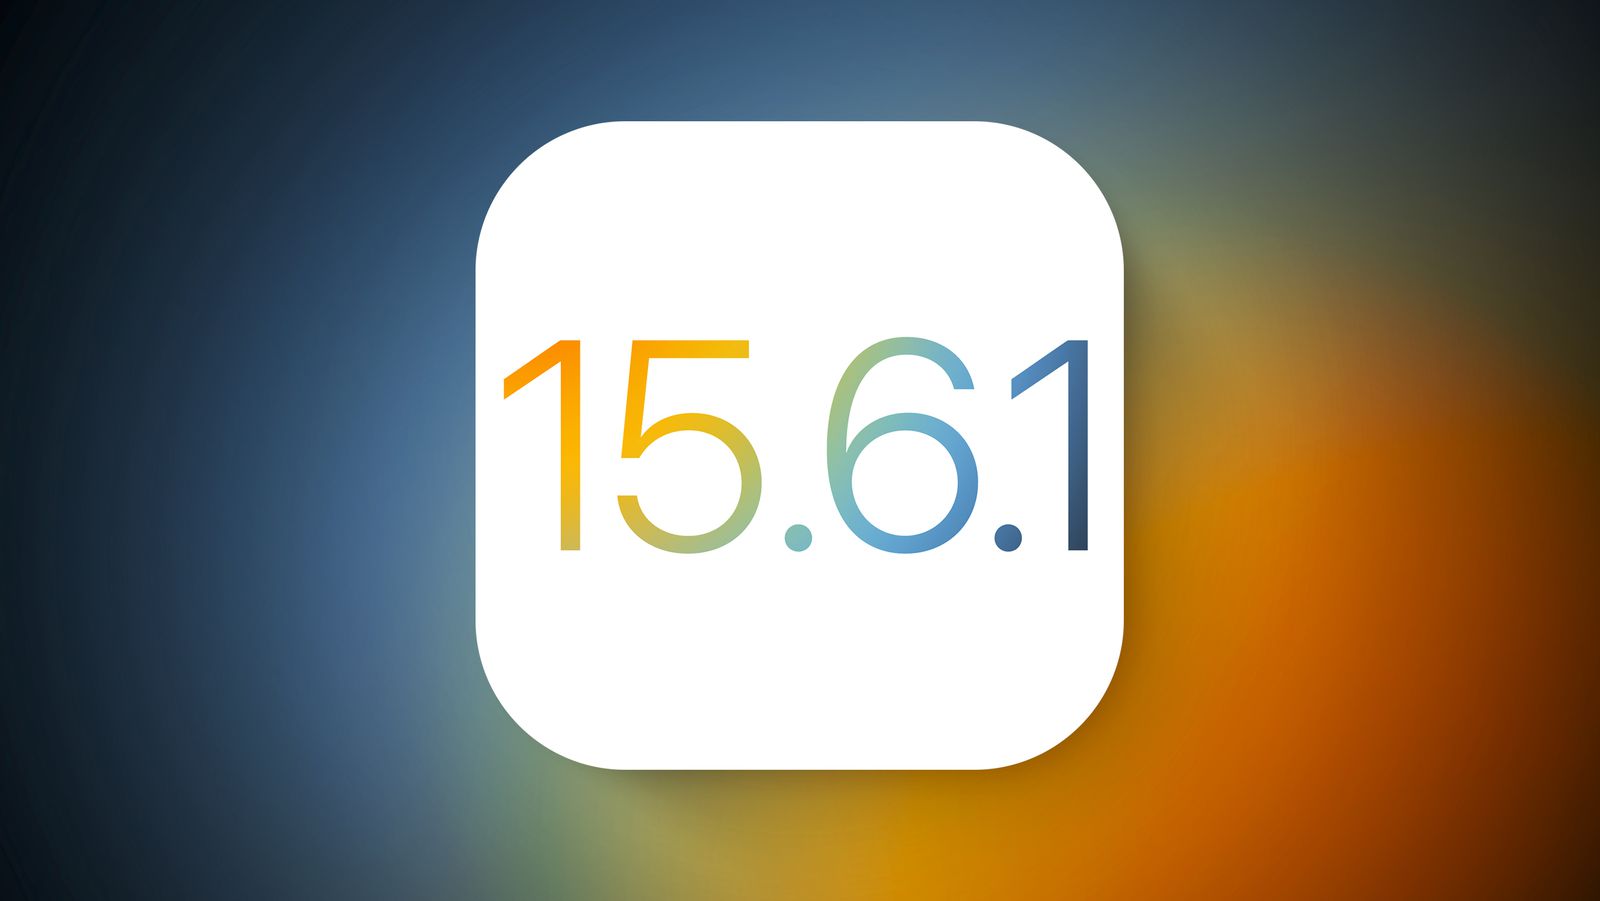 Waiting for iOS 16: Apple has released iOS 15.6.1 for iPhone users